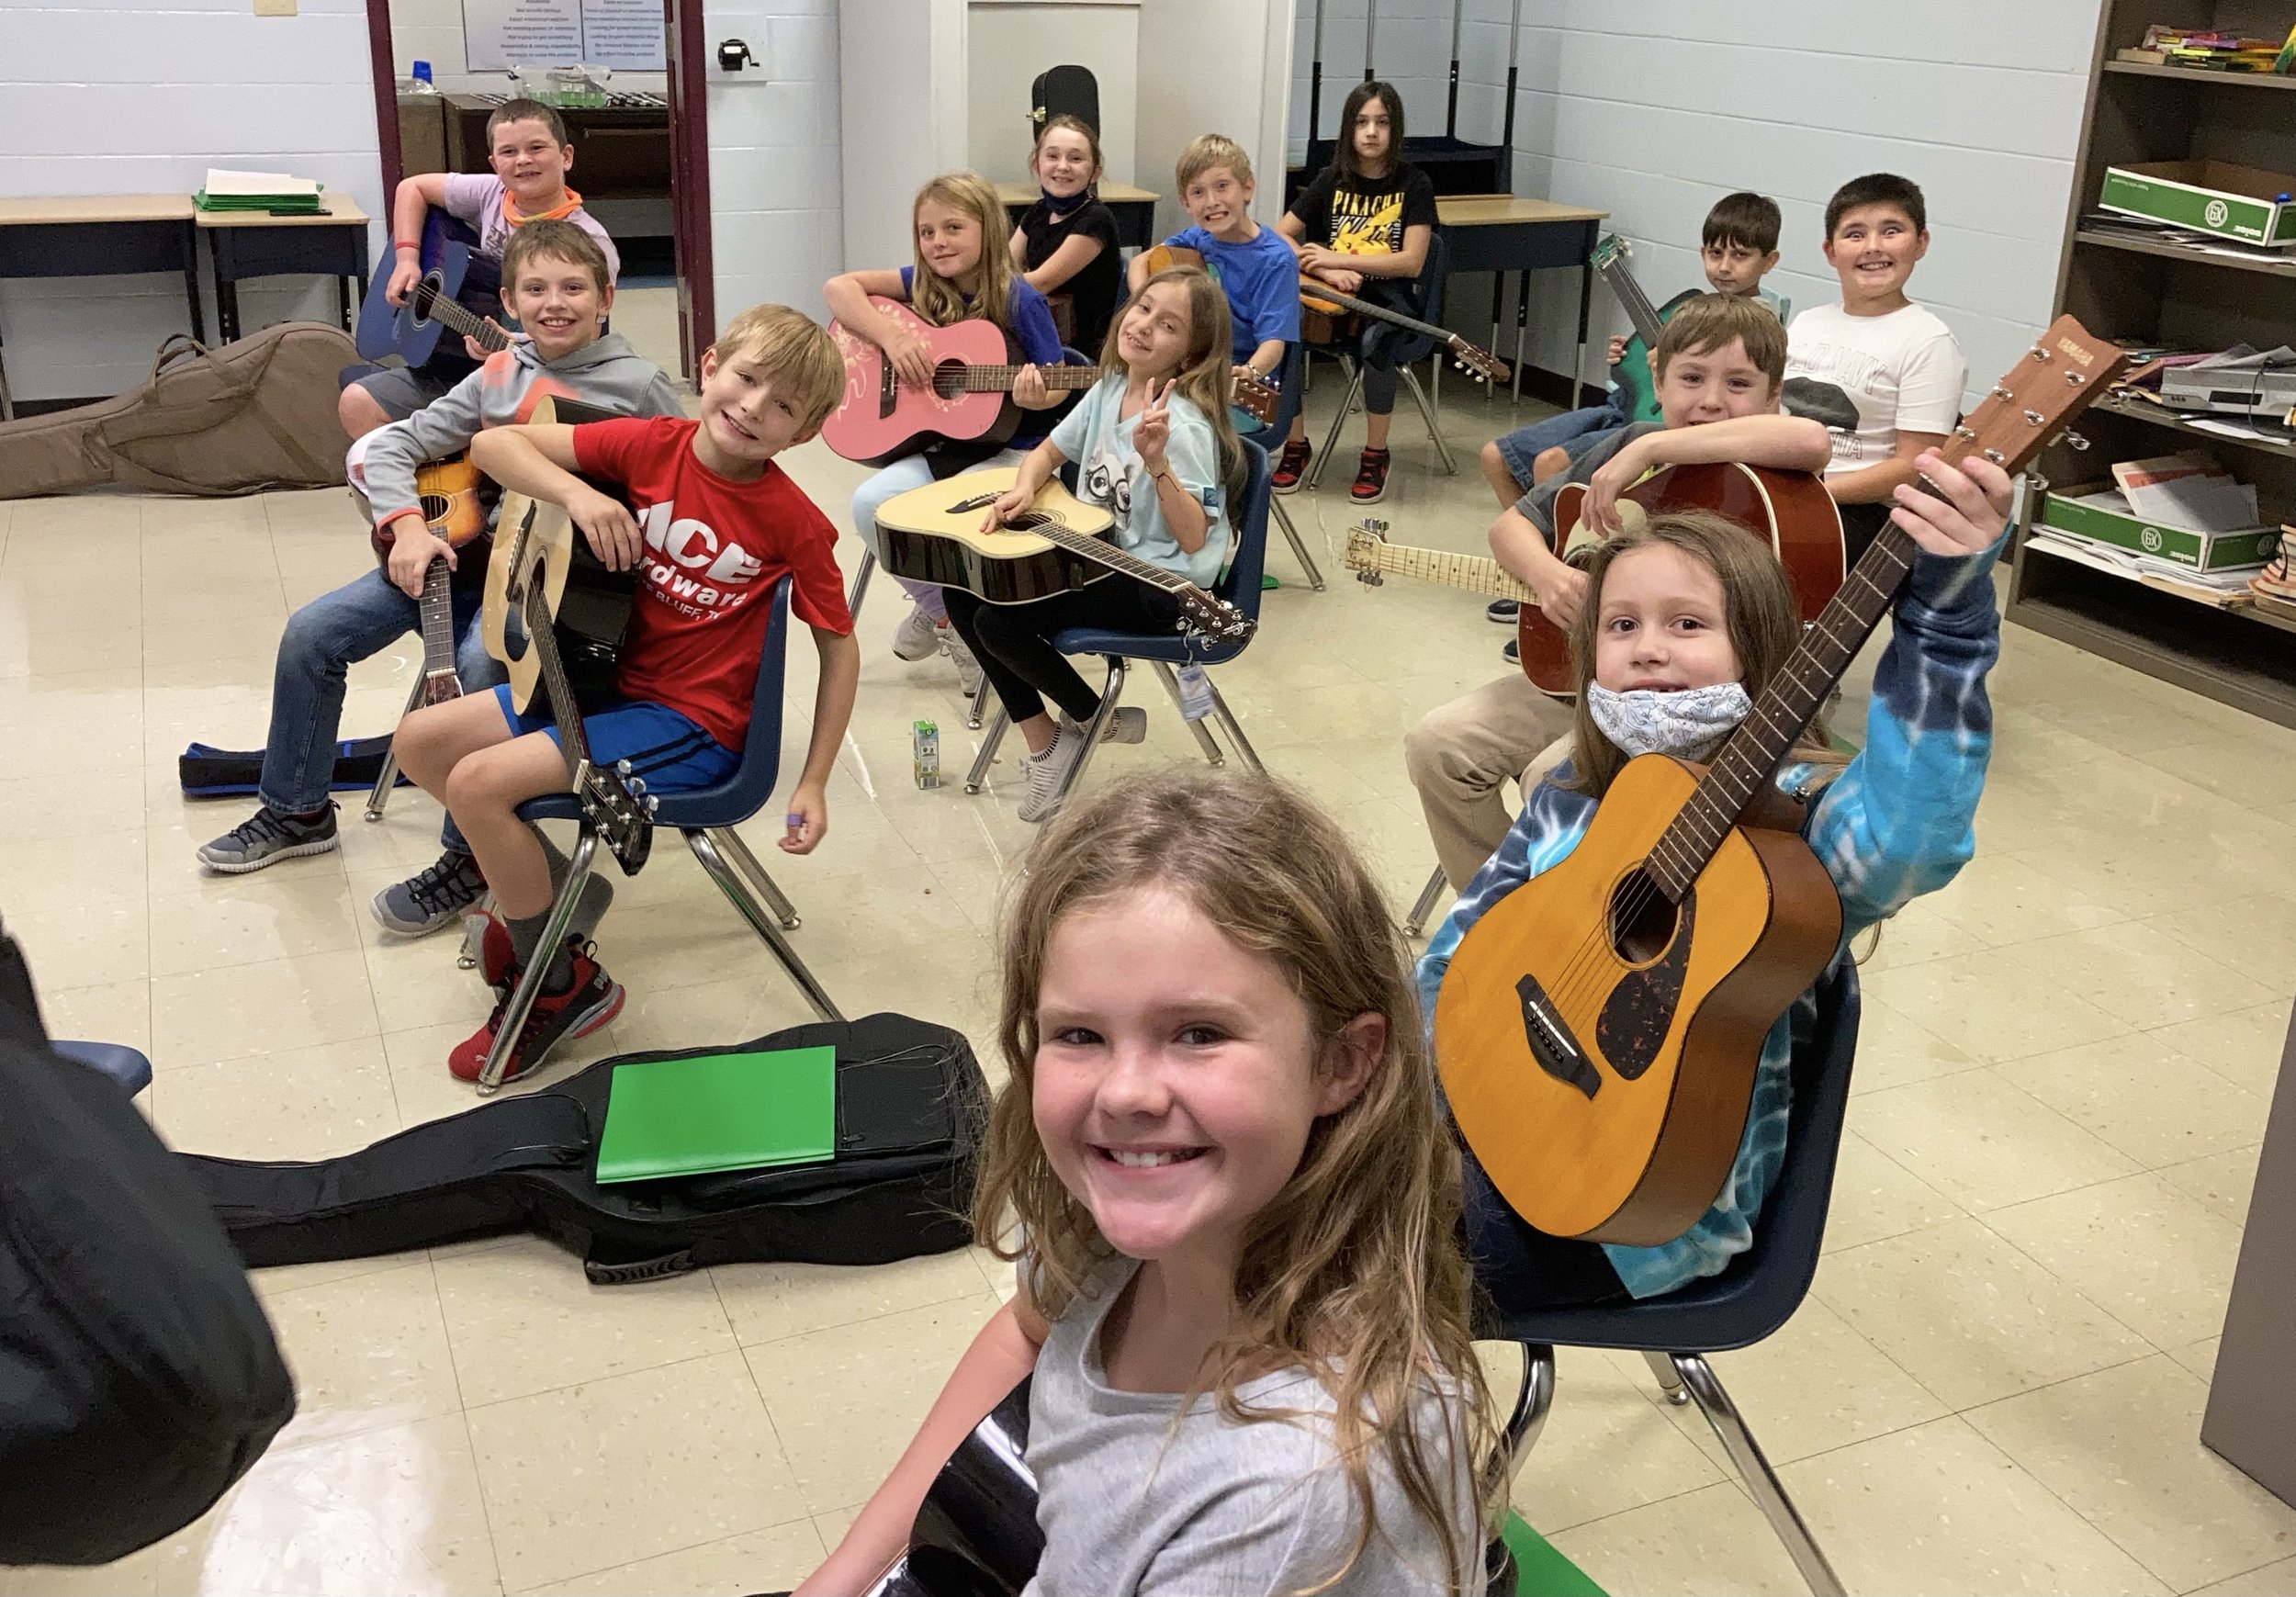   Welcome to    The Quest Center    We use music education to empower and positively impact the lives of children living in rural, lower-income communities, giving them essential skills to help them reach their potential.    Learn more   